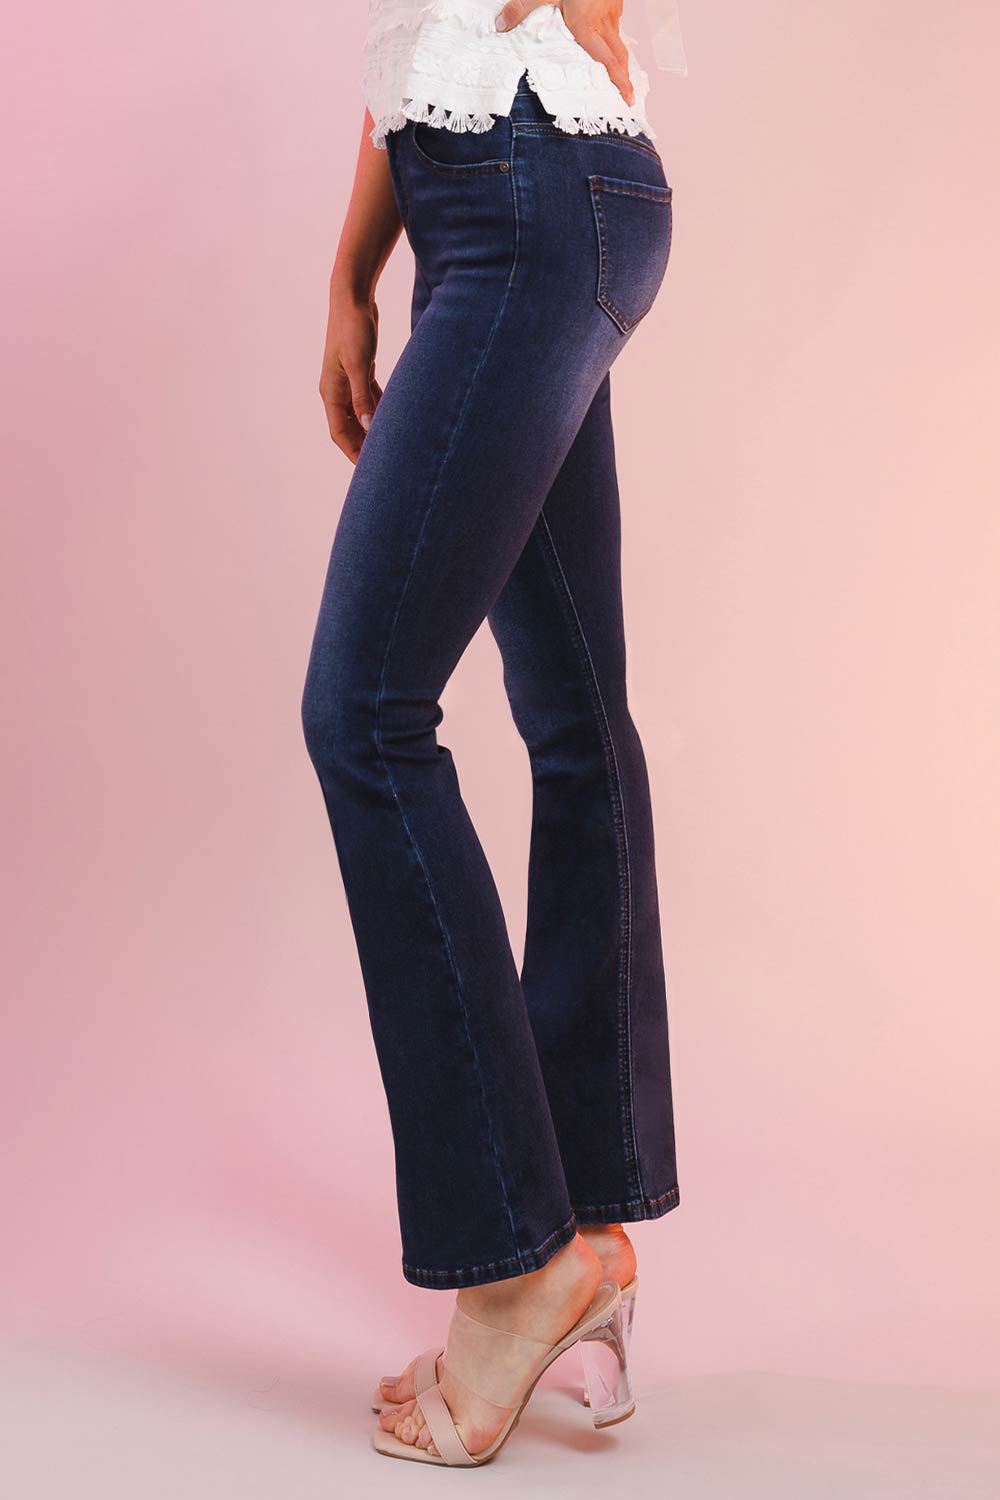 WEP3480 CLASSIC BOOTCUT JEANS MAIN IMAGE